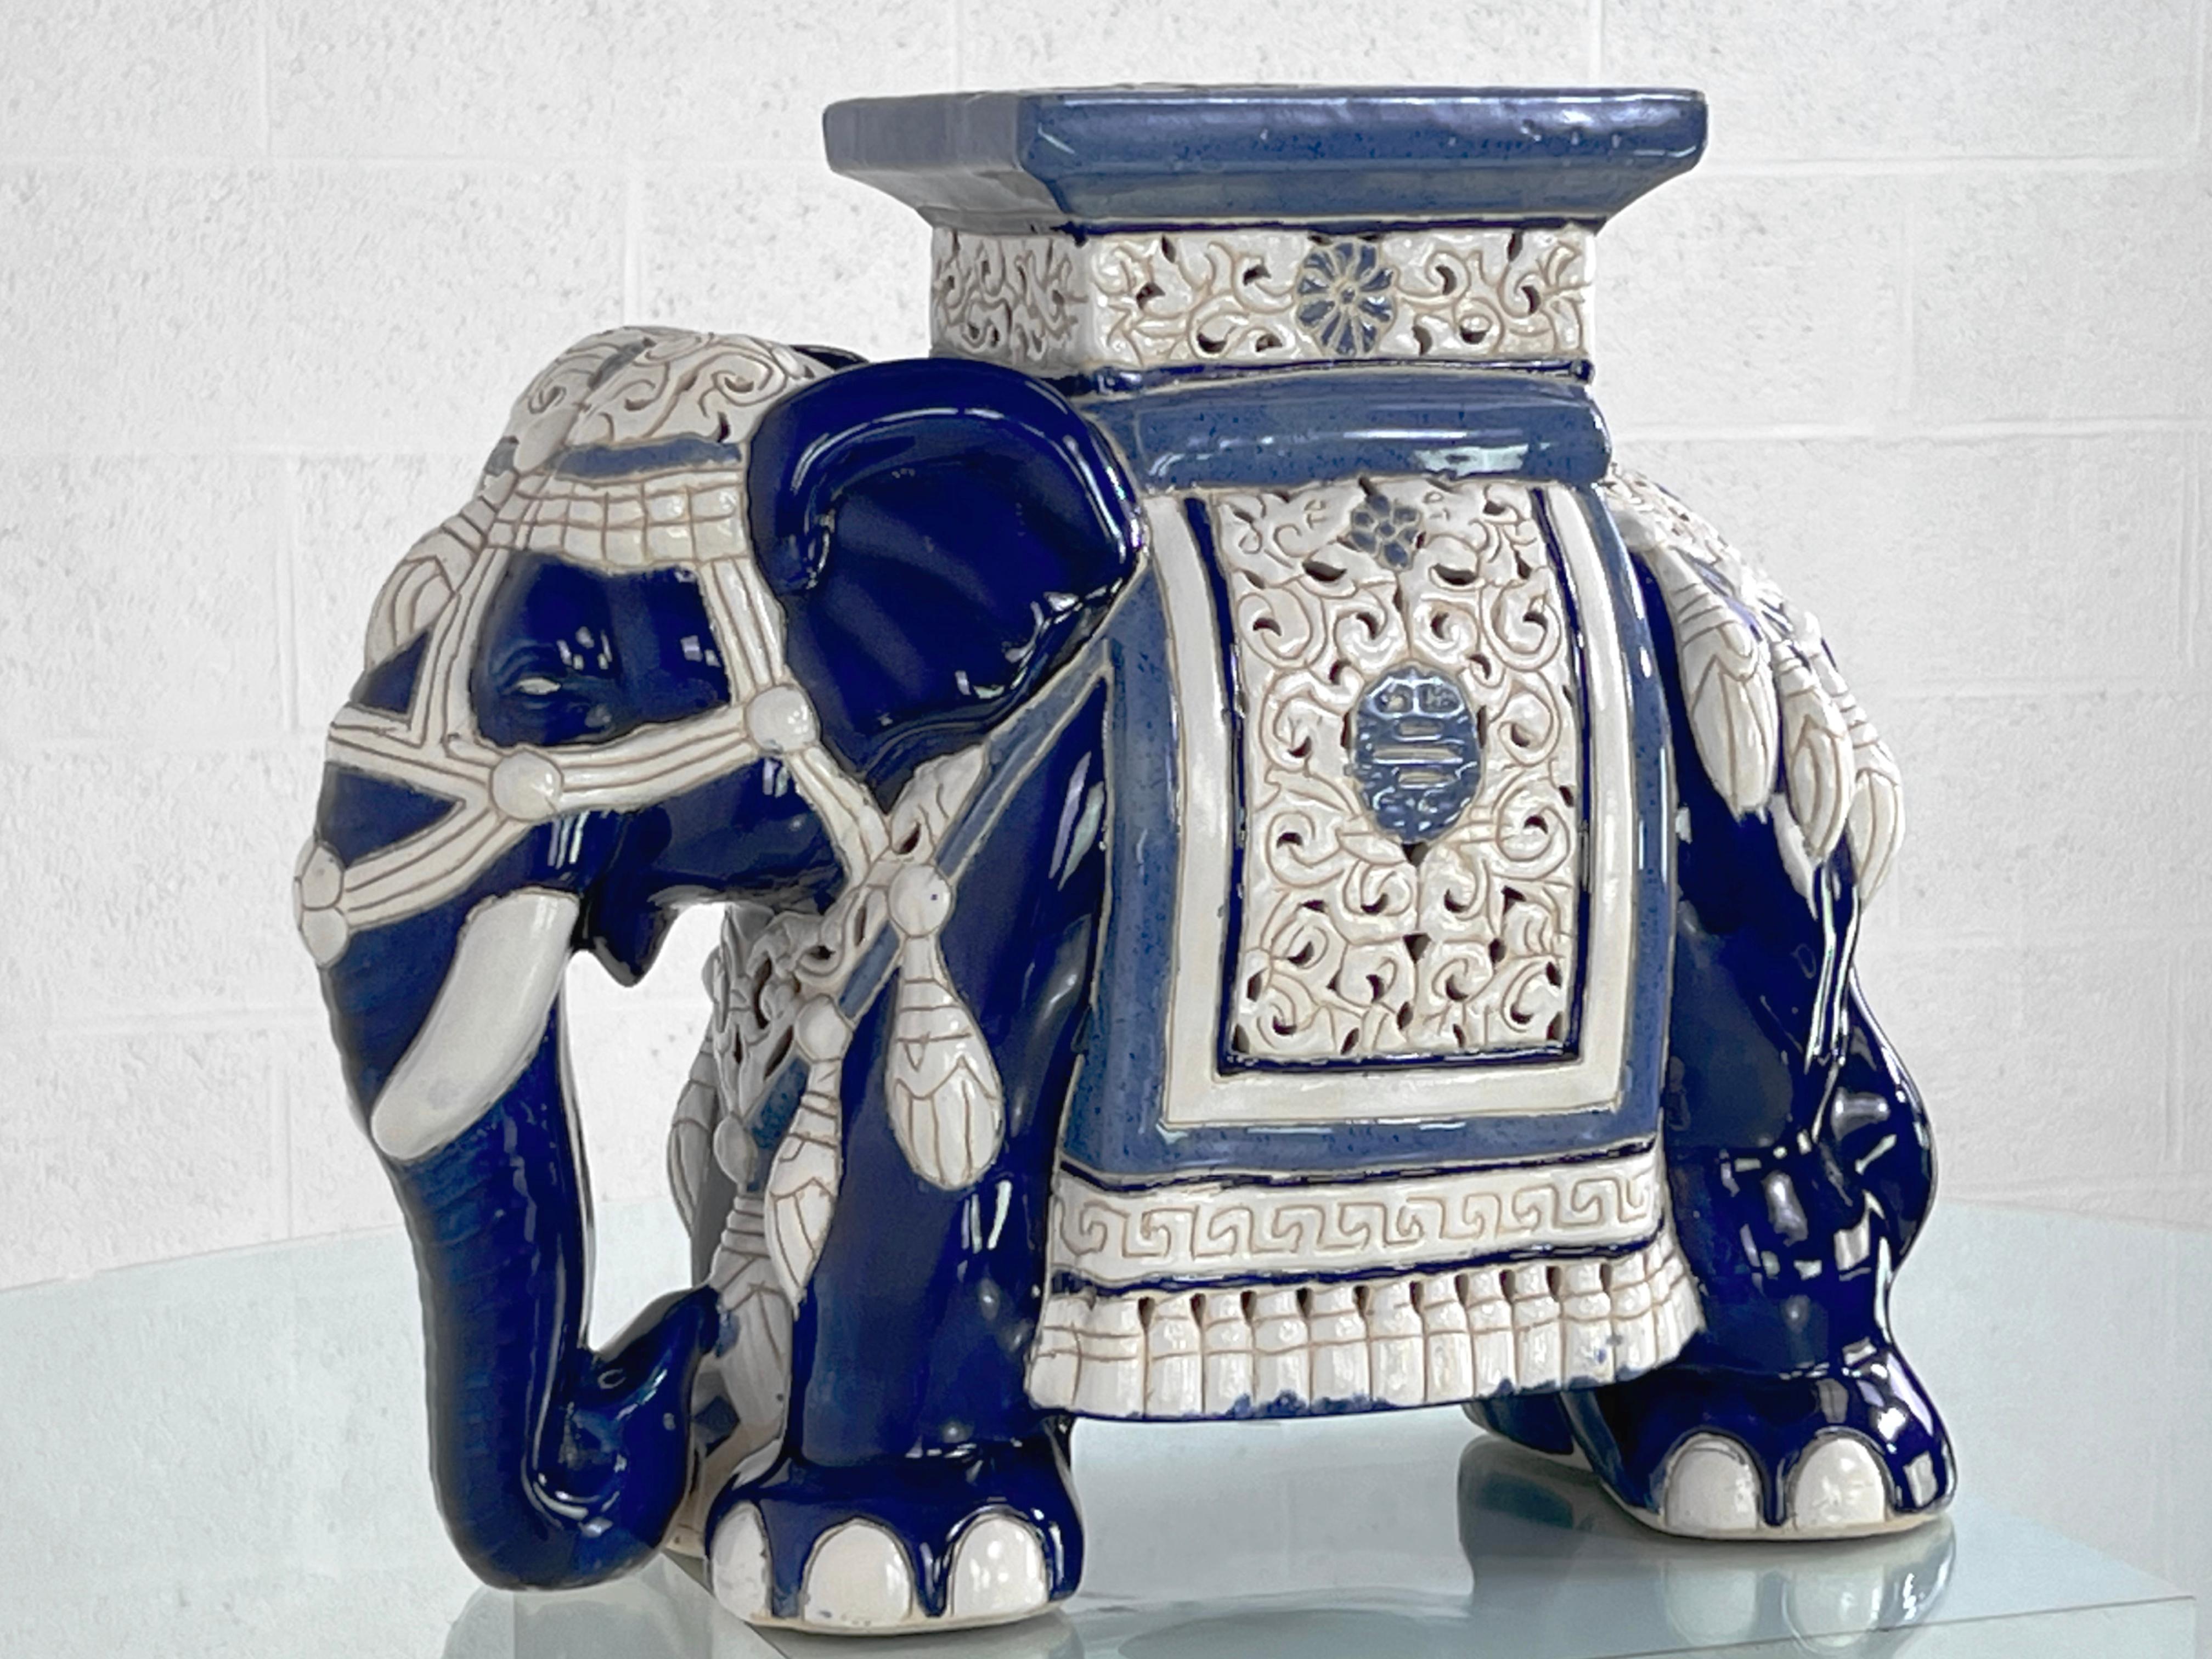 1960s - 1970s Vintage Ceramic Side Table Or Stool Elephant shaped in white and blue colors